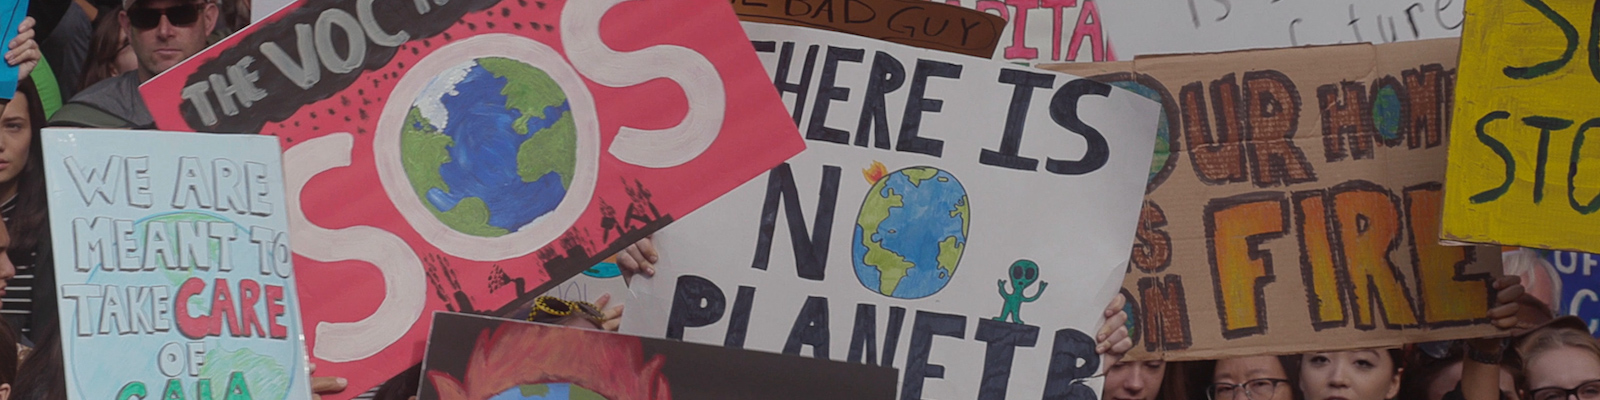 Young people hold signs at a climate change protest